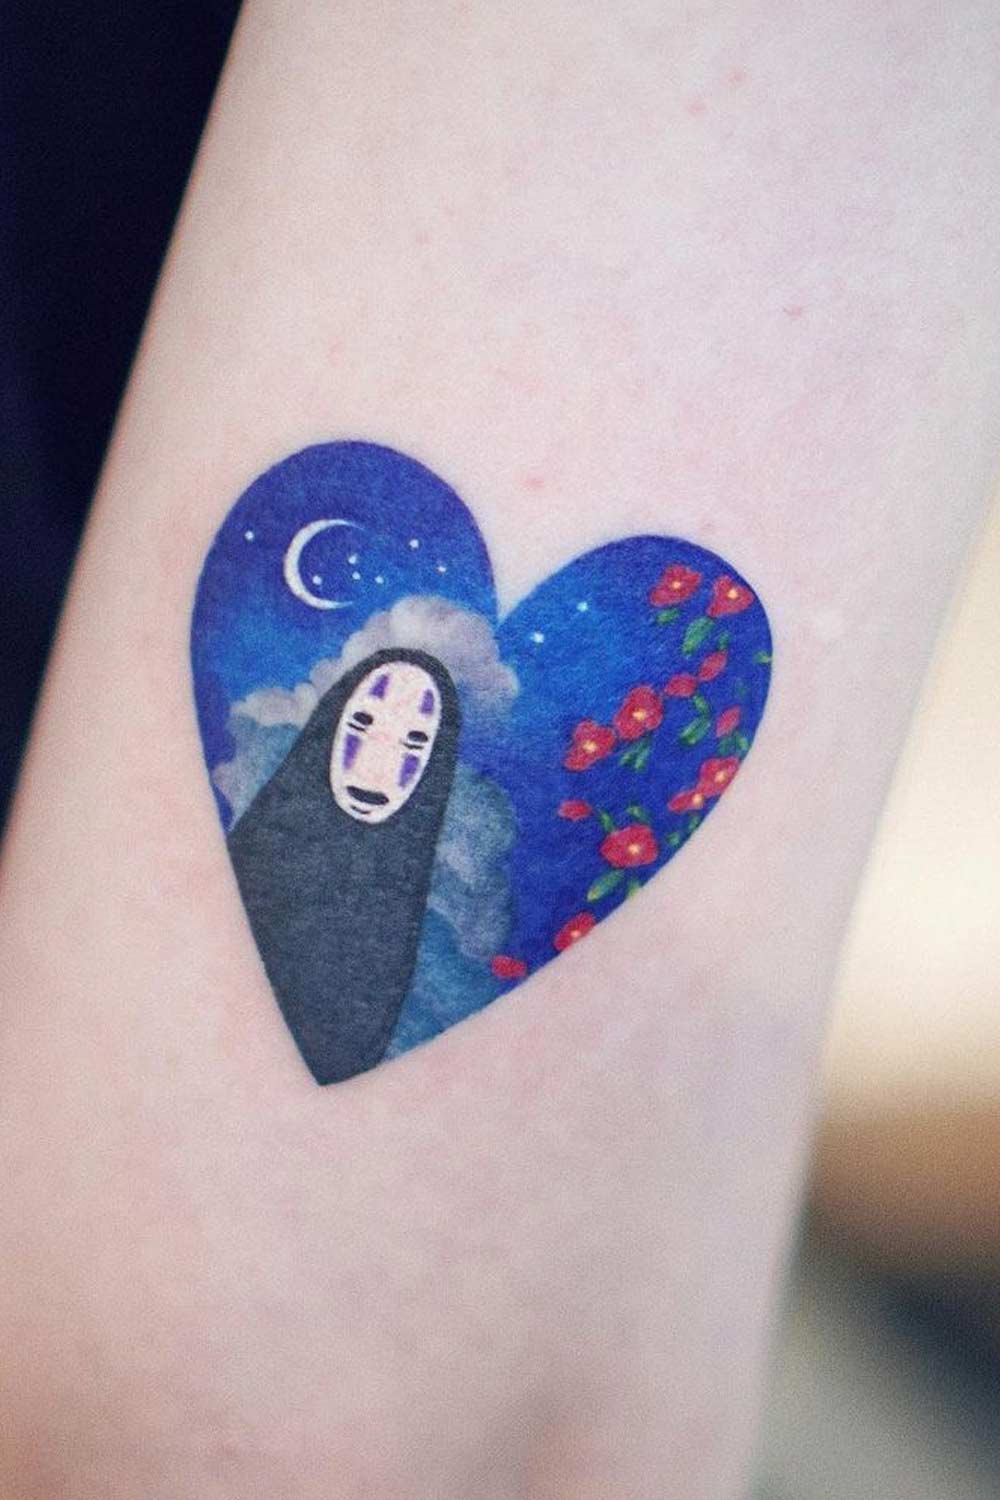 No-Face from Spirited Away Tattoo